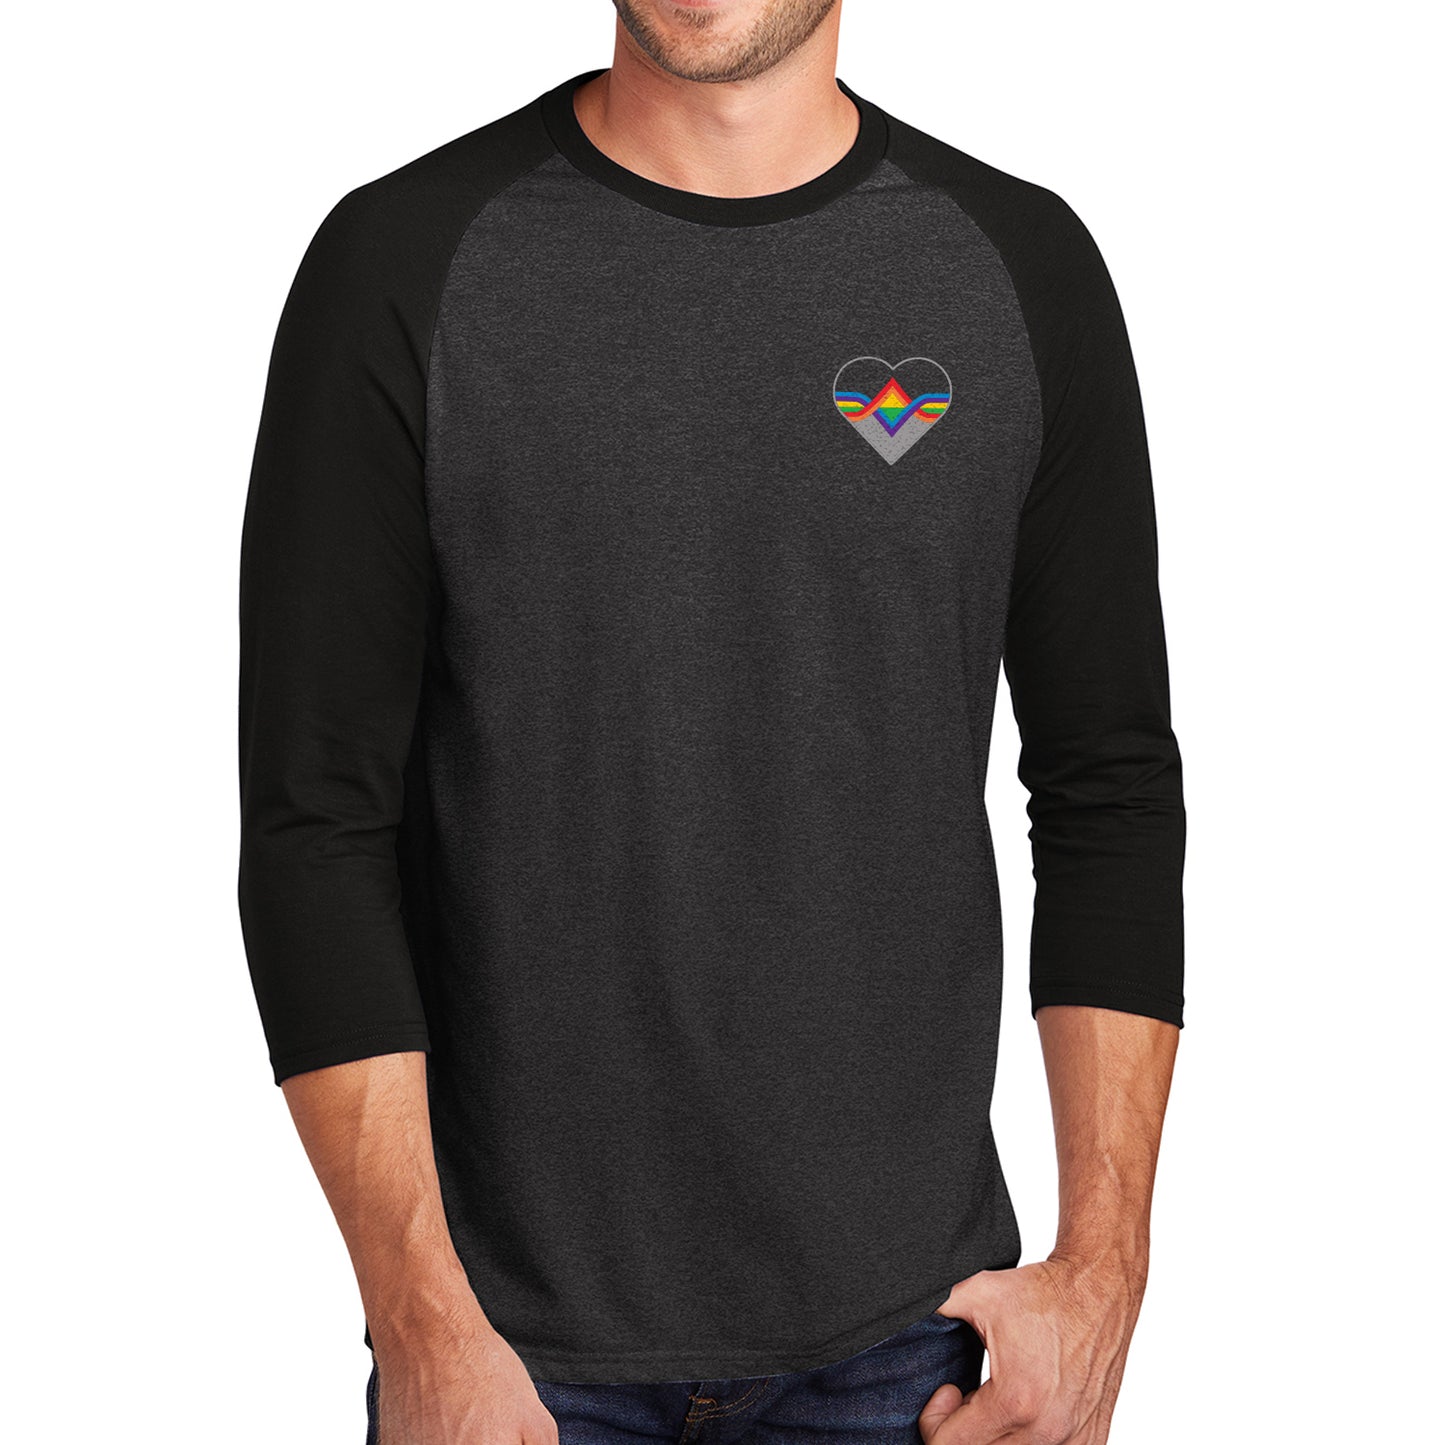 A male model wearing a grey longsleeve shirt with black sleeves. The Acting Ensign Pride symbol is at the top left corner of the shirt.  The symbol is a grey heart with rainbow lines running through the center.